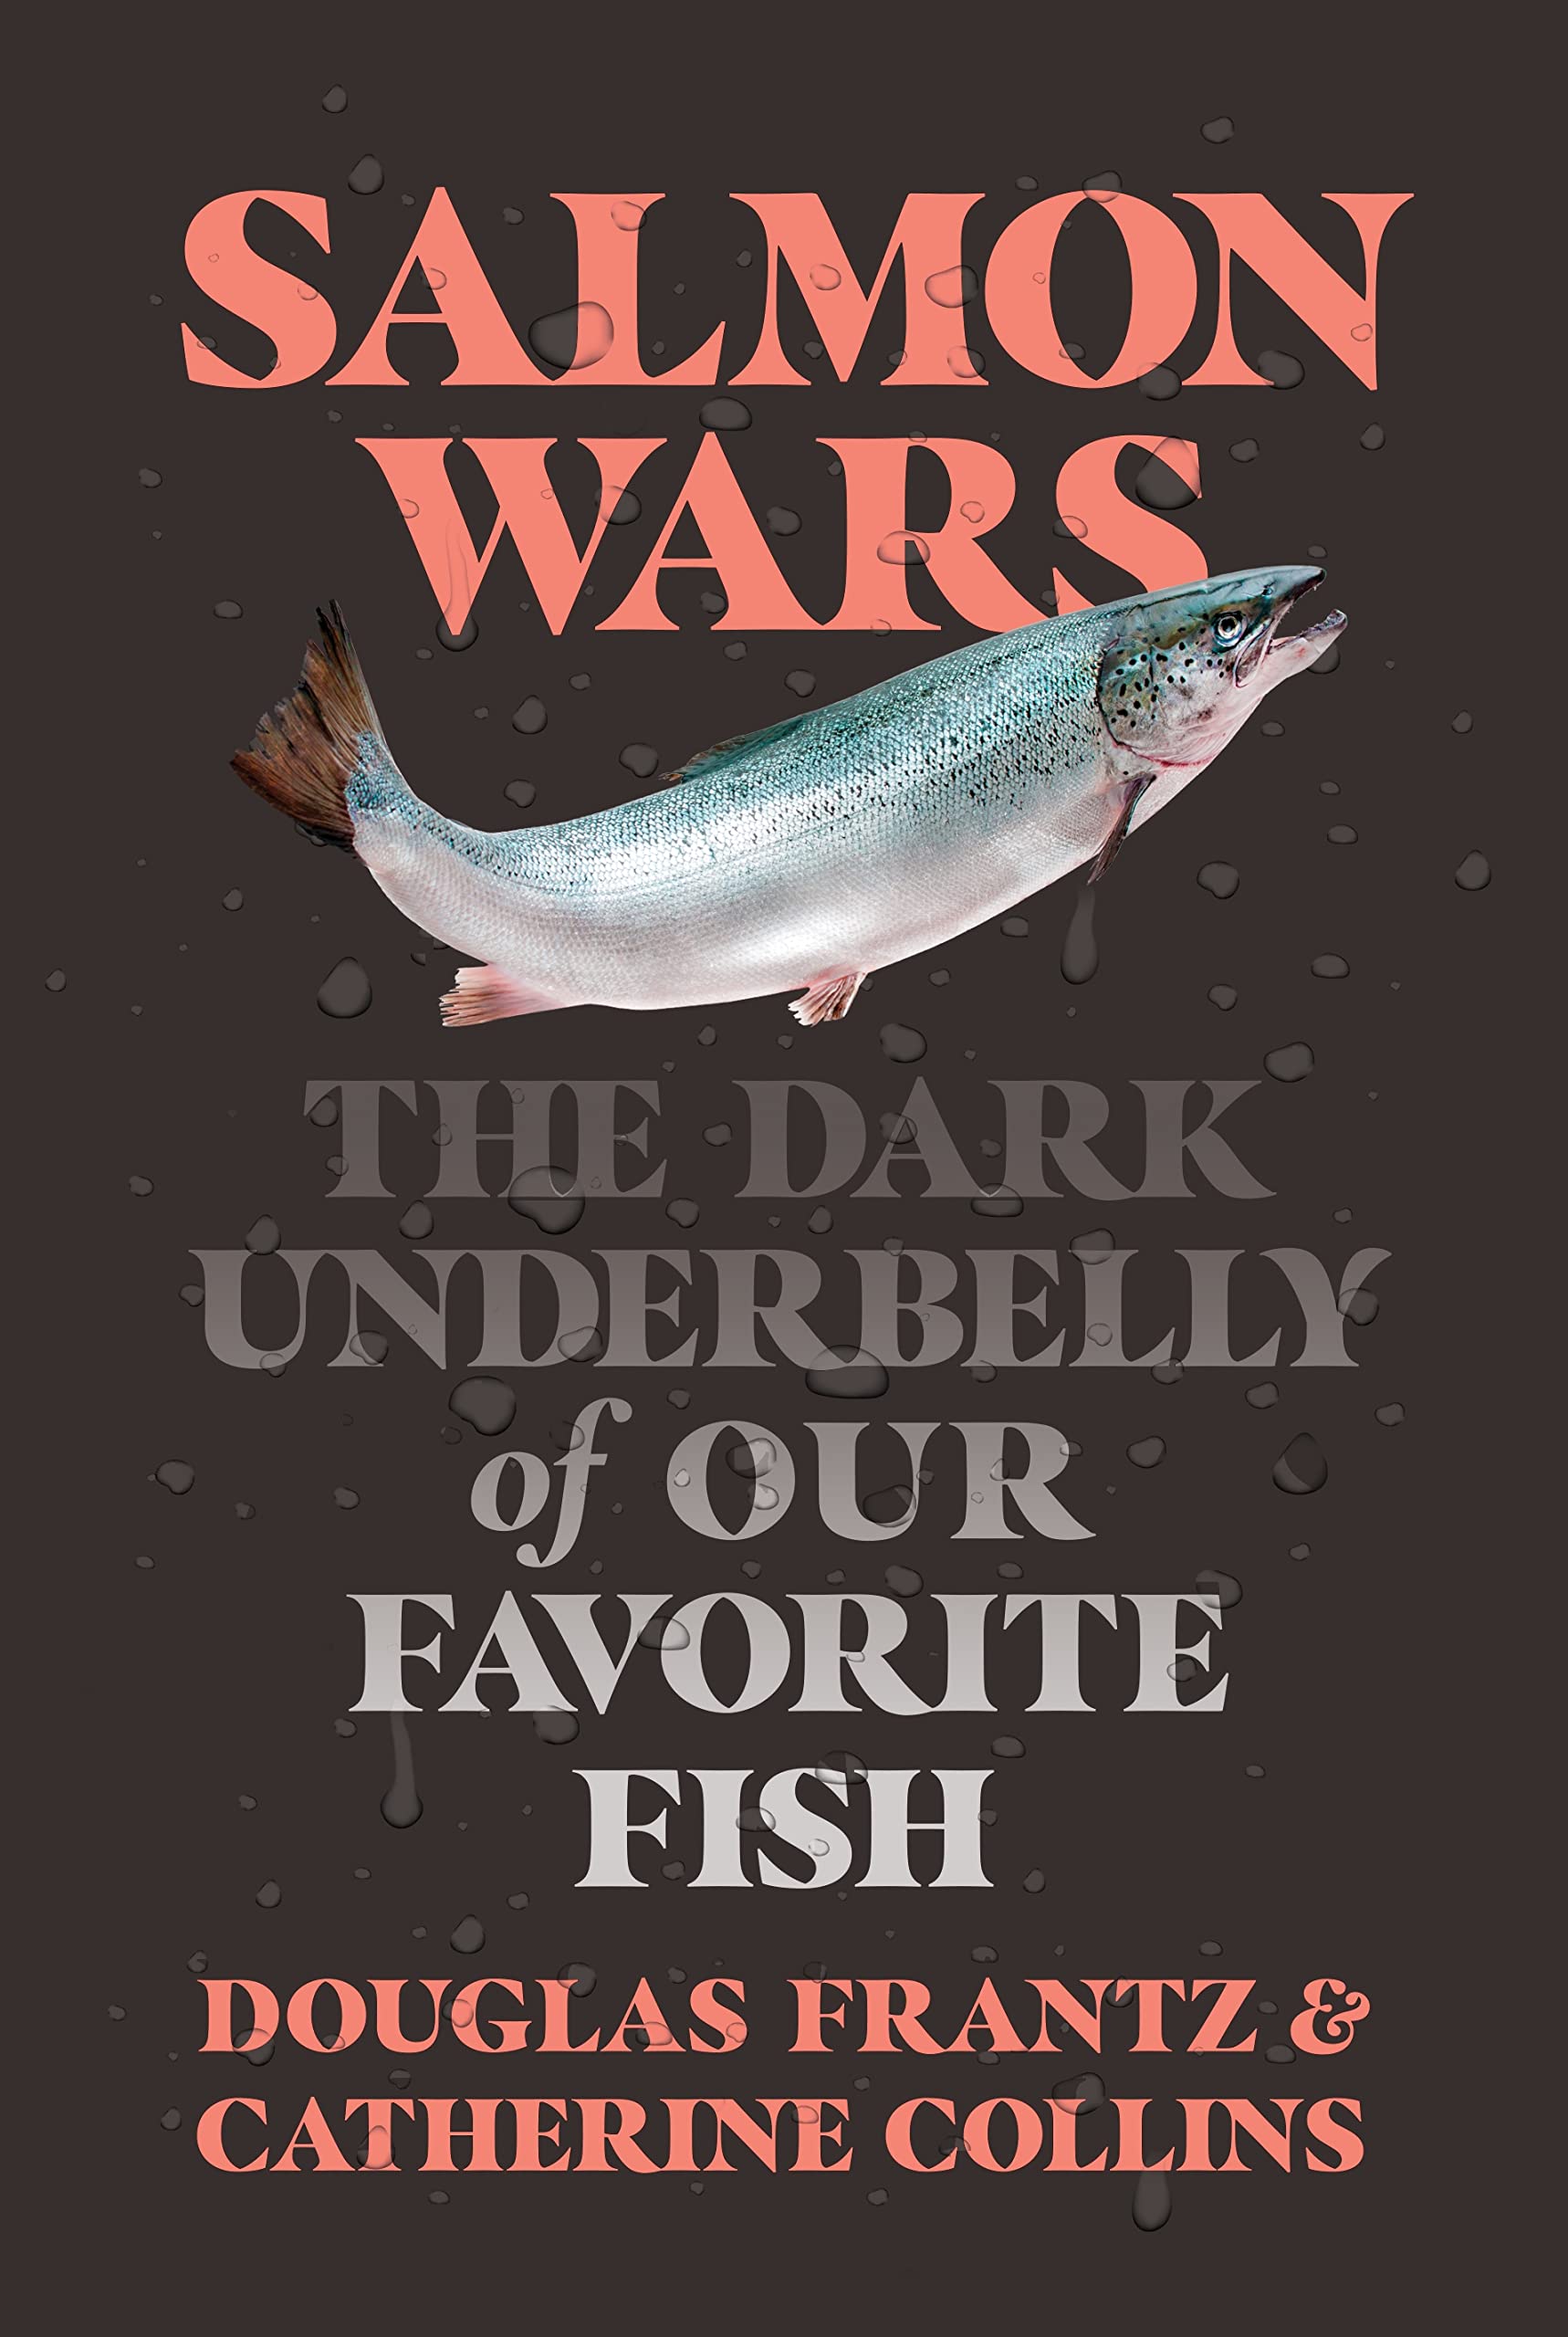 book cover salmon wars by catherine collins and douglas frantz